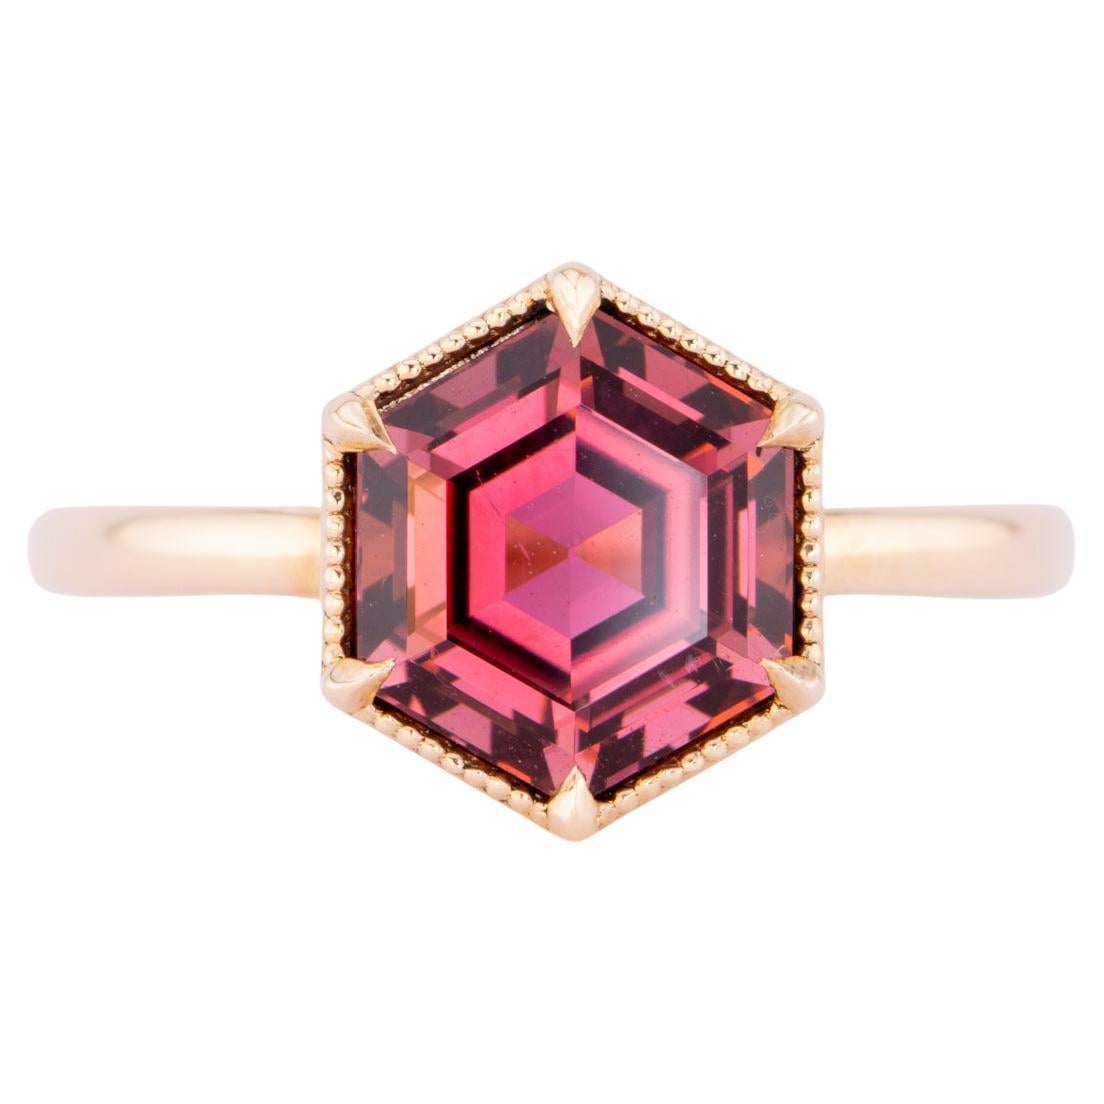 3.12ct Hexagon Rubellite Tourmaline Engagement Ring 14K Gold For Sale